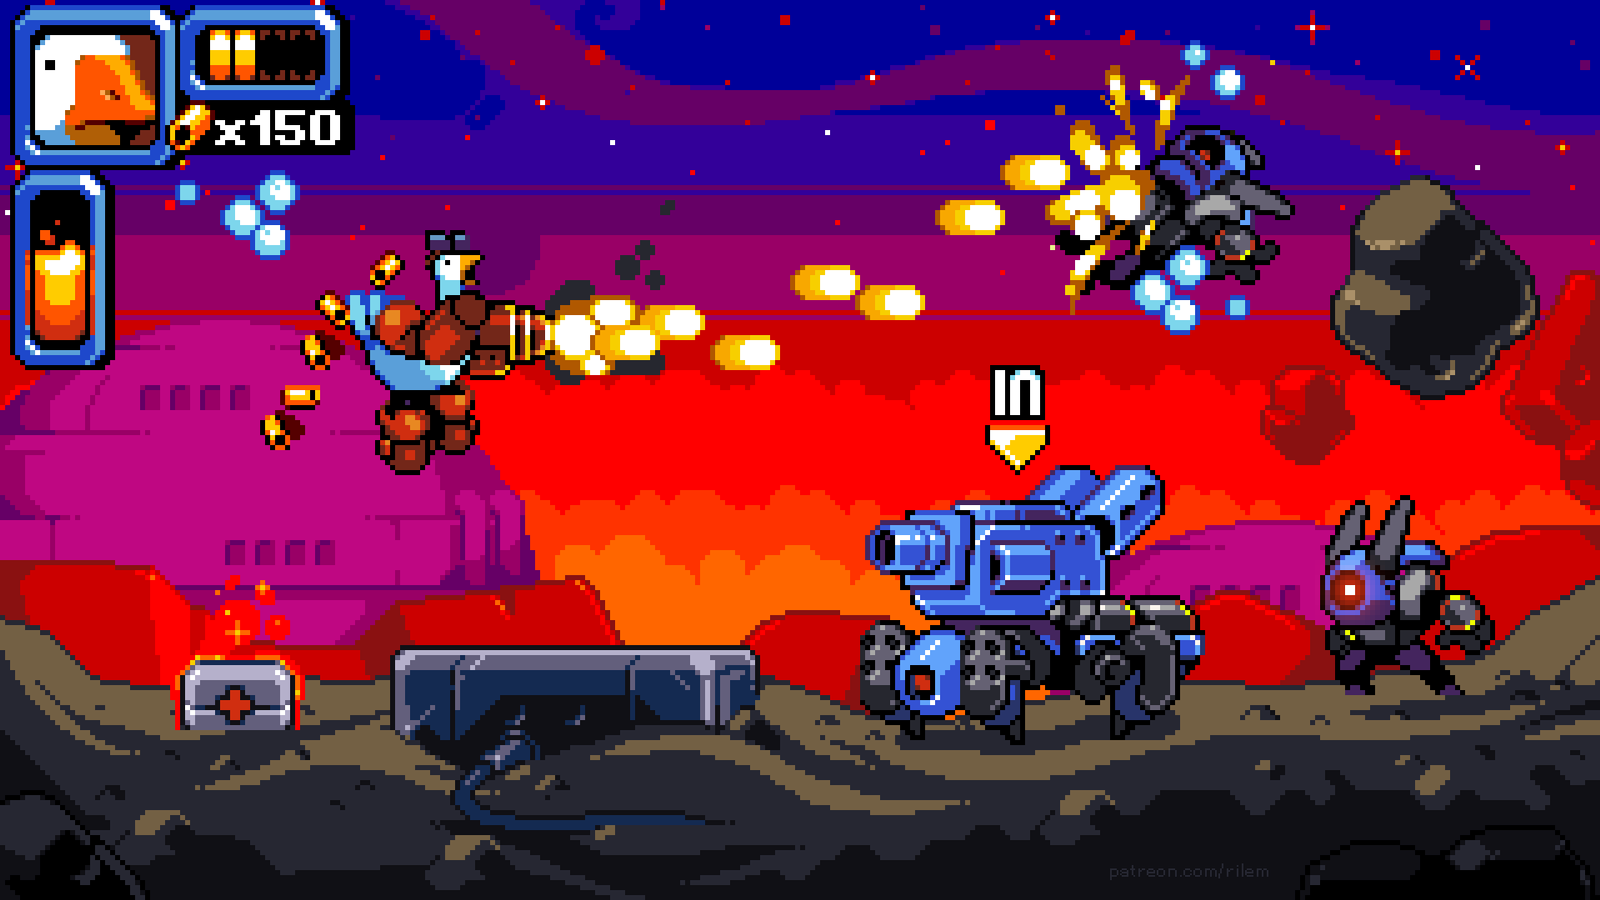 Another image from Mighty Goose showcasing a battle